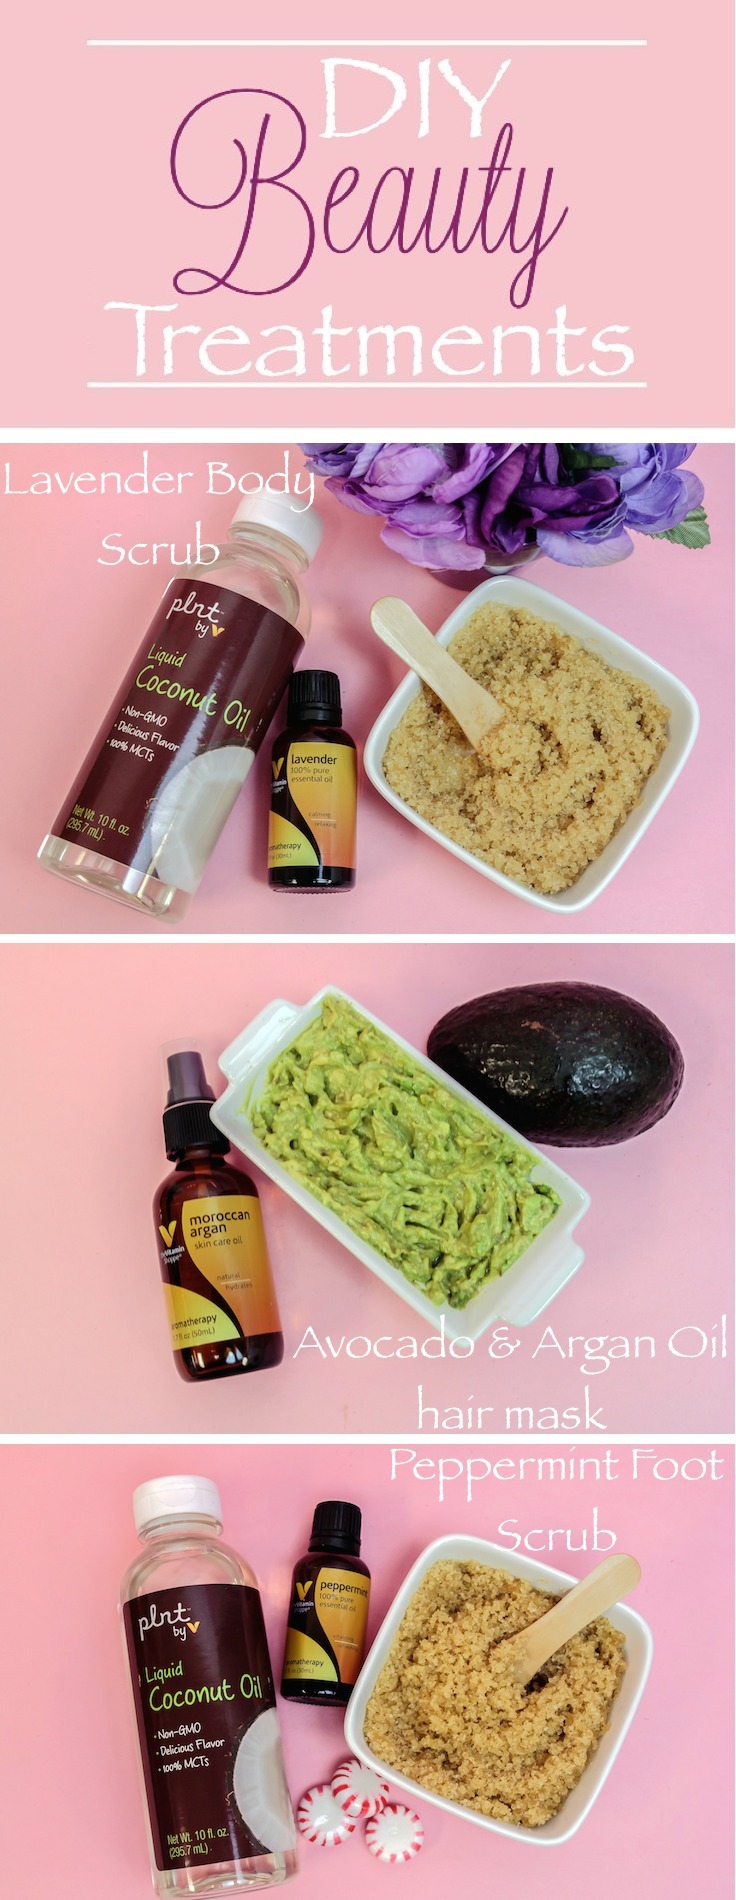 DIY Natural Beauty Recipes for Glowing Skin & Healthy Hair